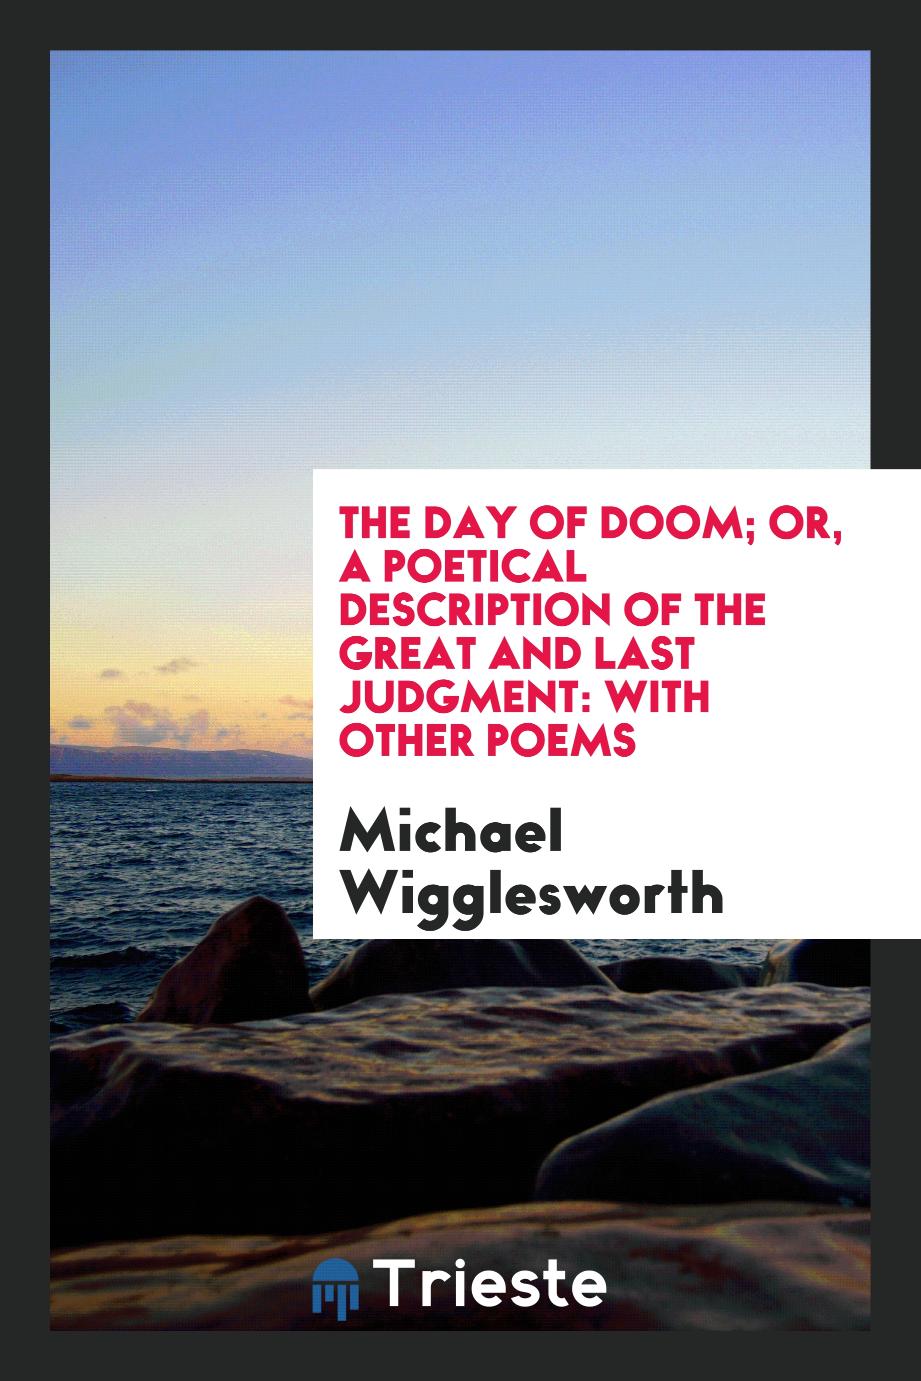 The Day of Doom; or, a Poetical Description of the Great and Last Judgment: With Other Poems